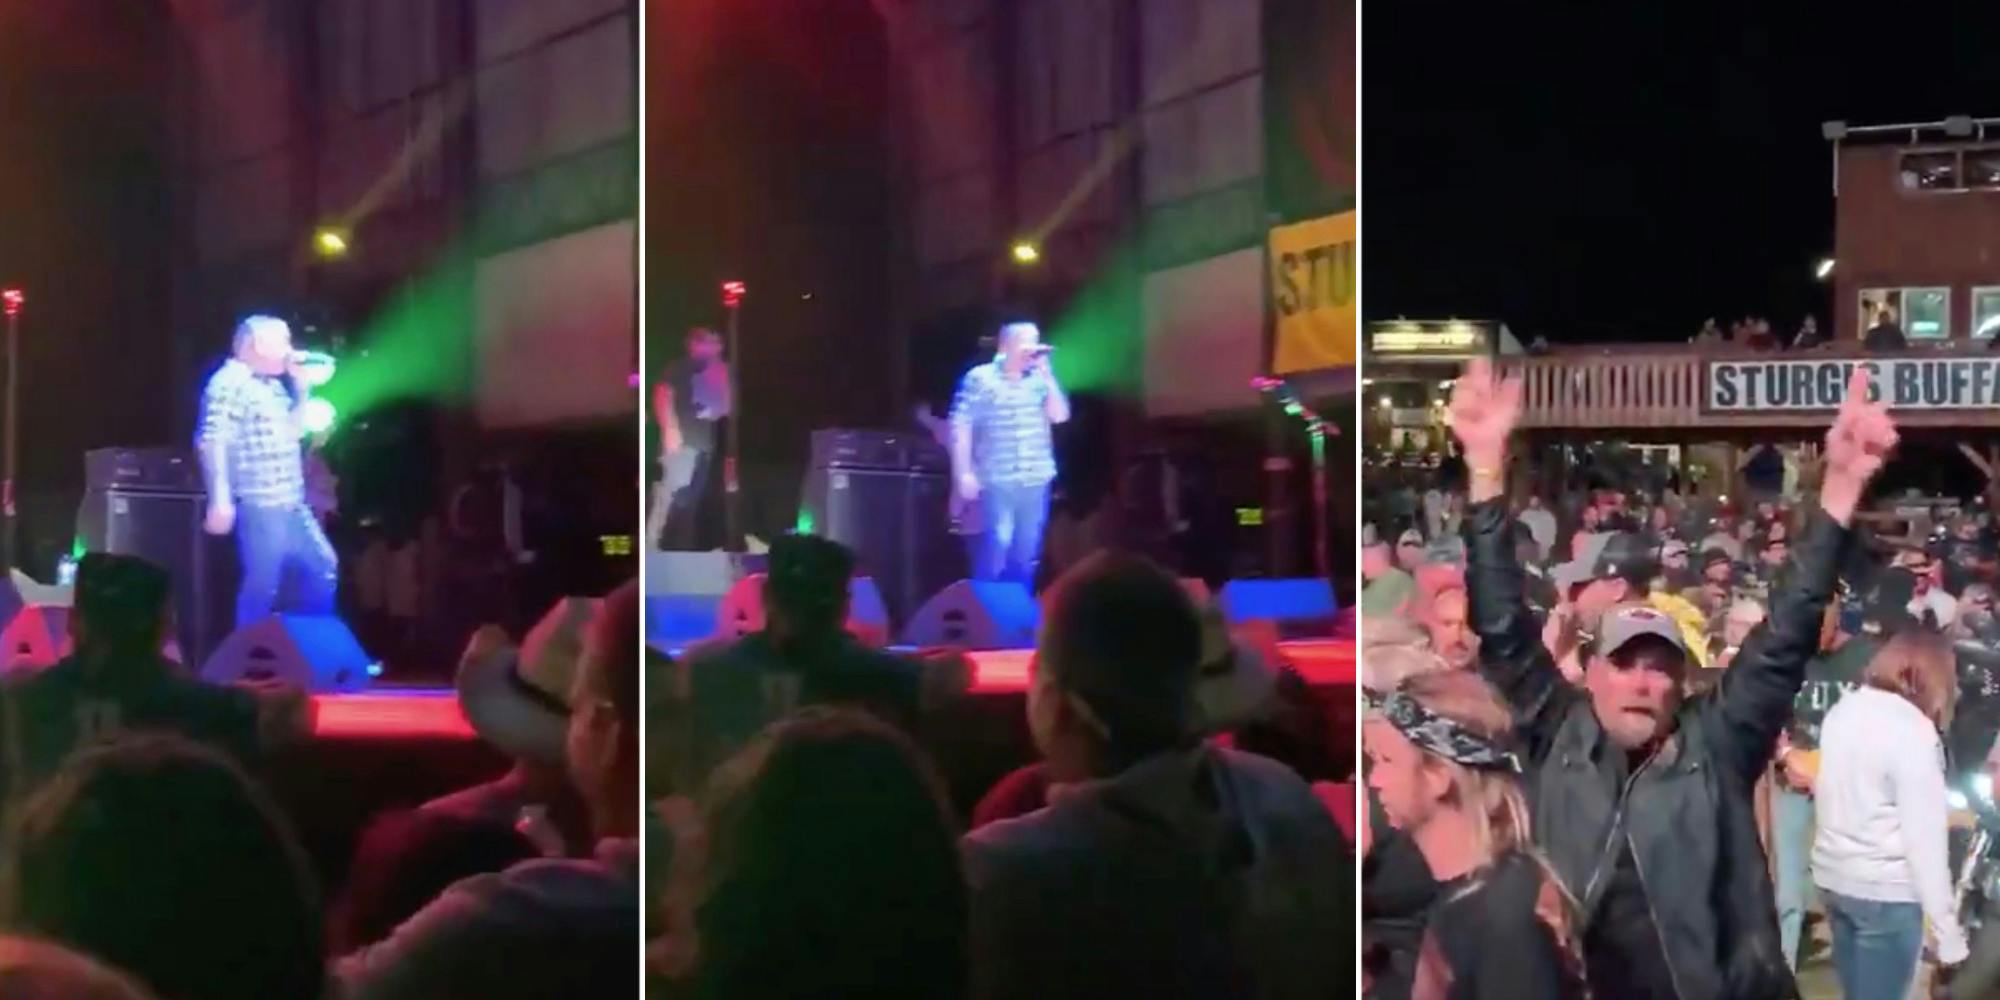 Smash Mouth Held Concert for Hundreds With Little Social Distancing